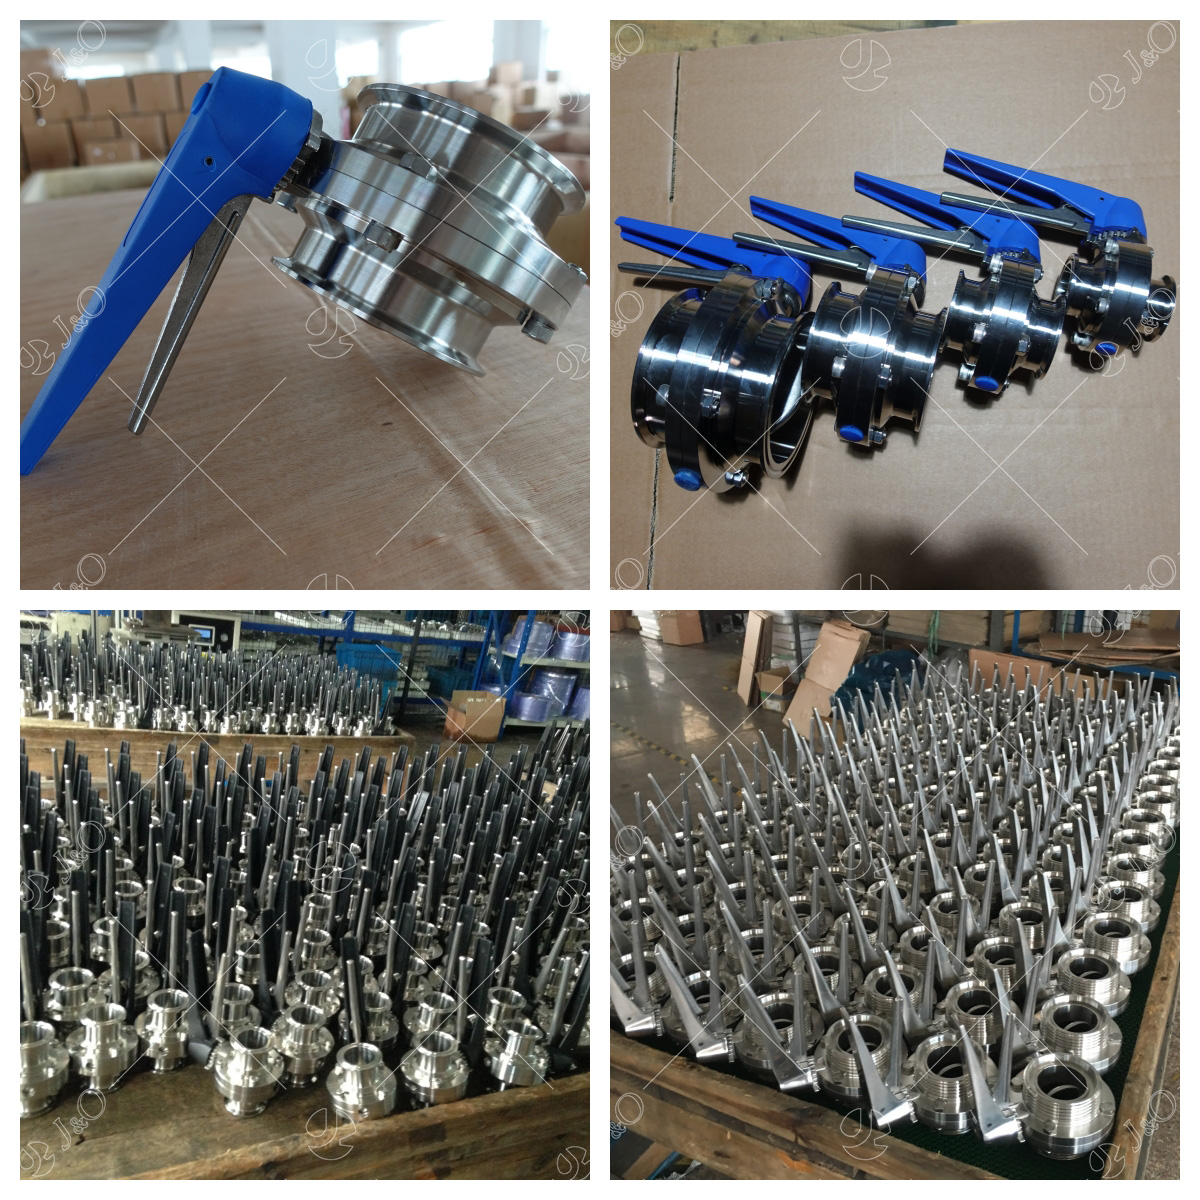 Sanitary Stainless Steel Thread Male Butterfly Valve With 12 Positions Grippper Handle